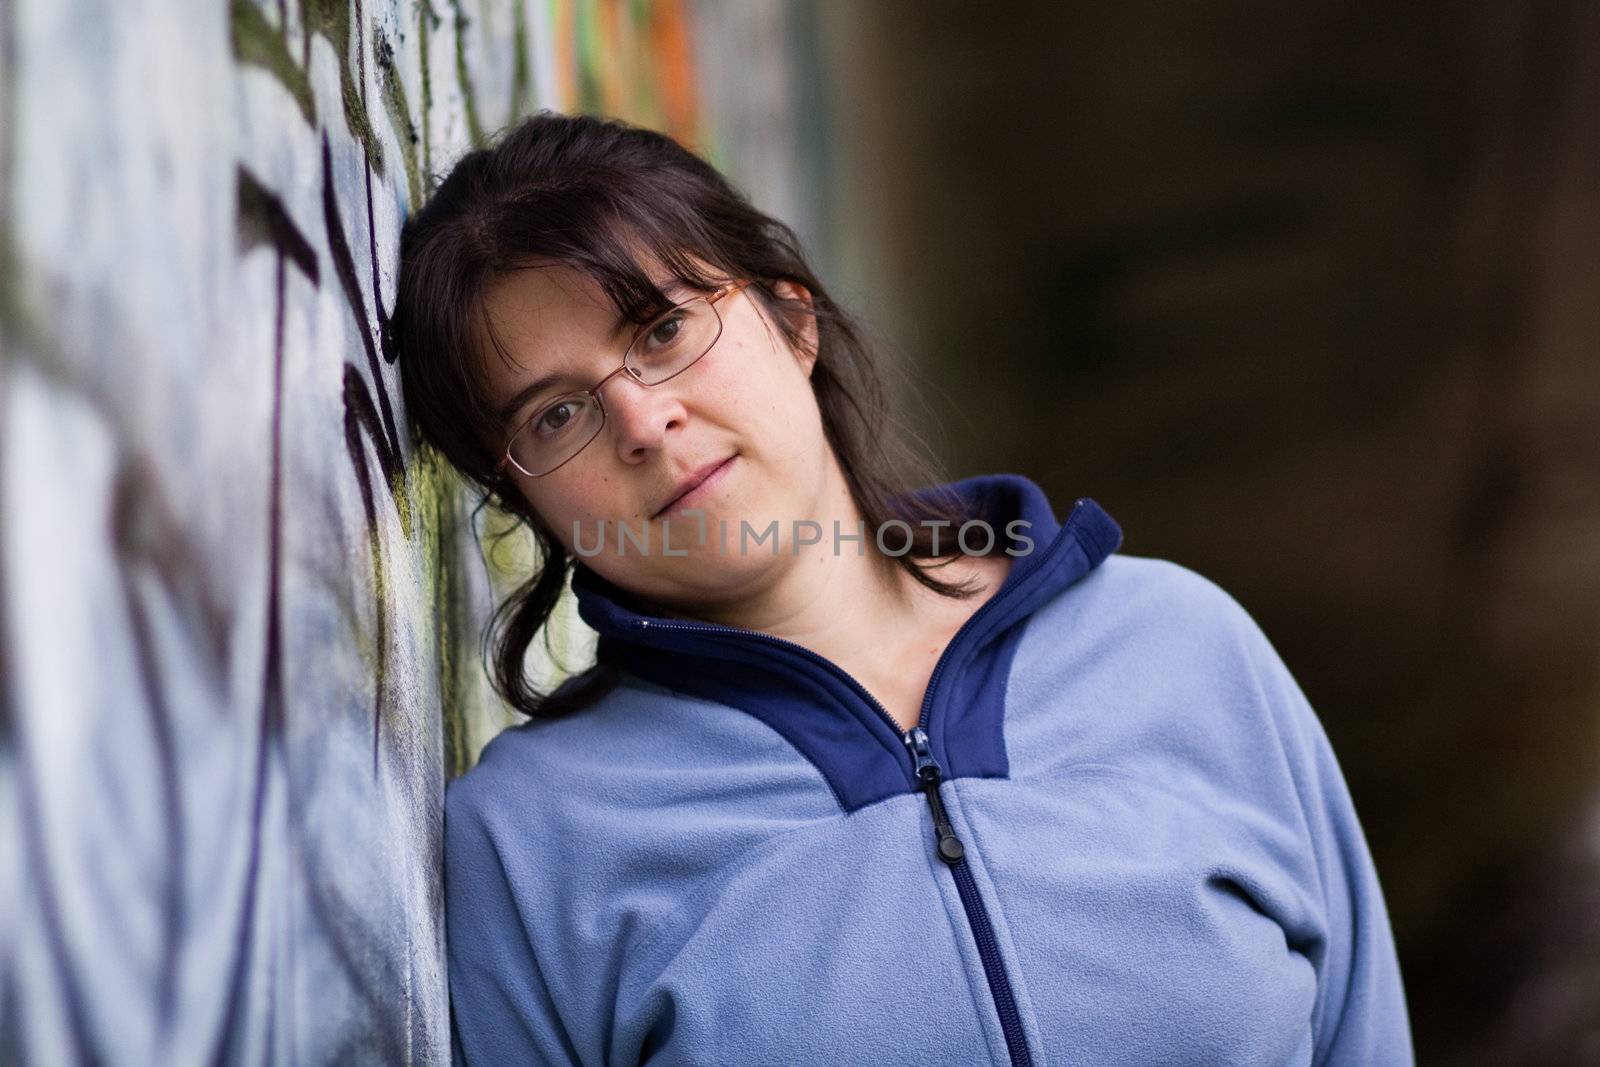 Young woman standing in front of a wall with graffiti